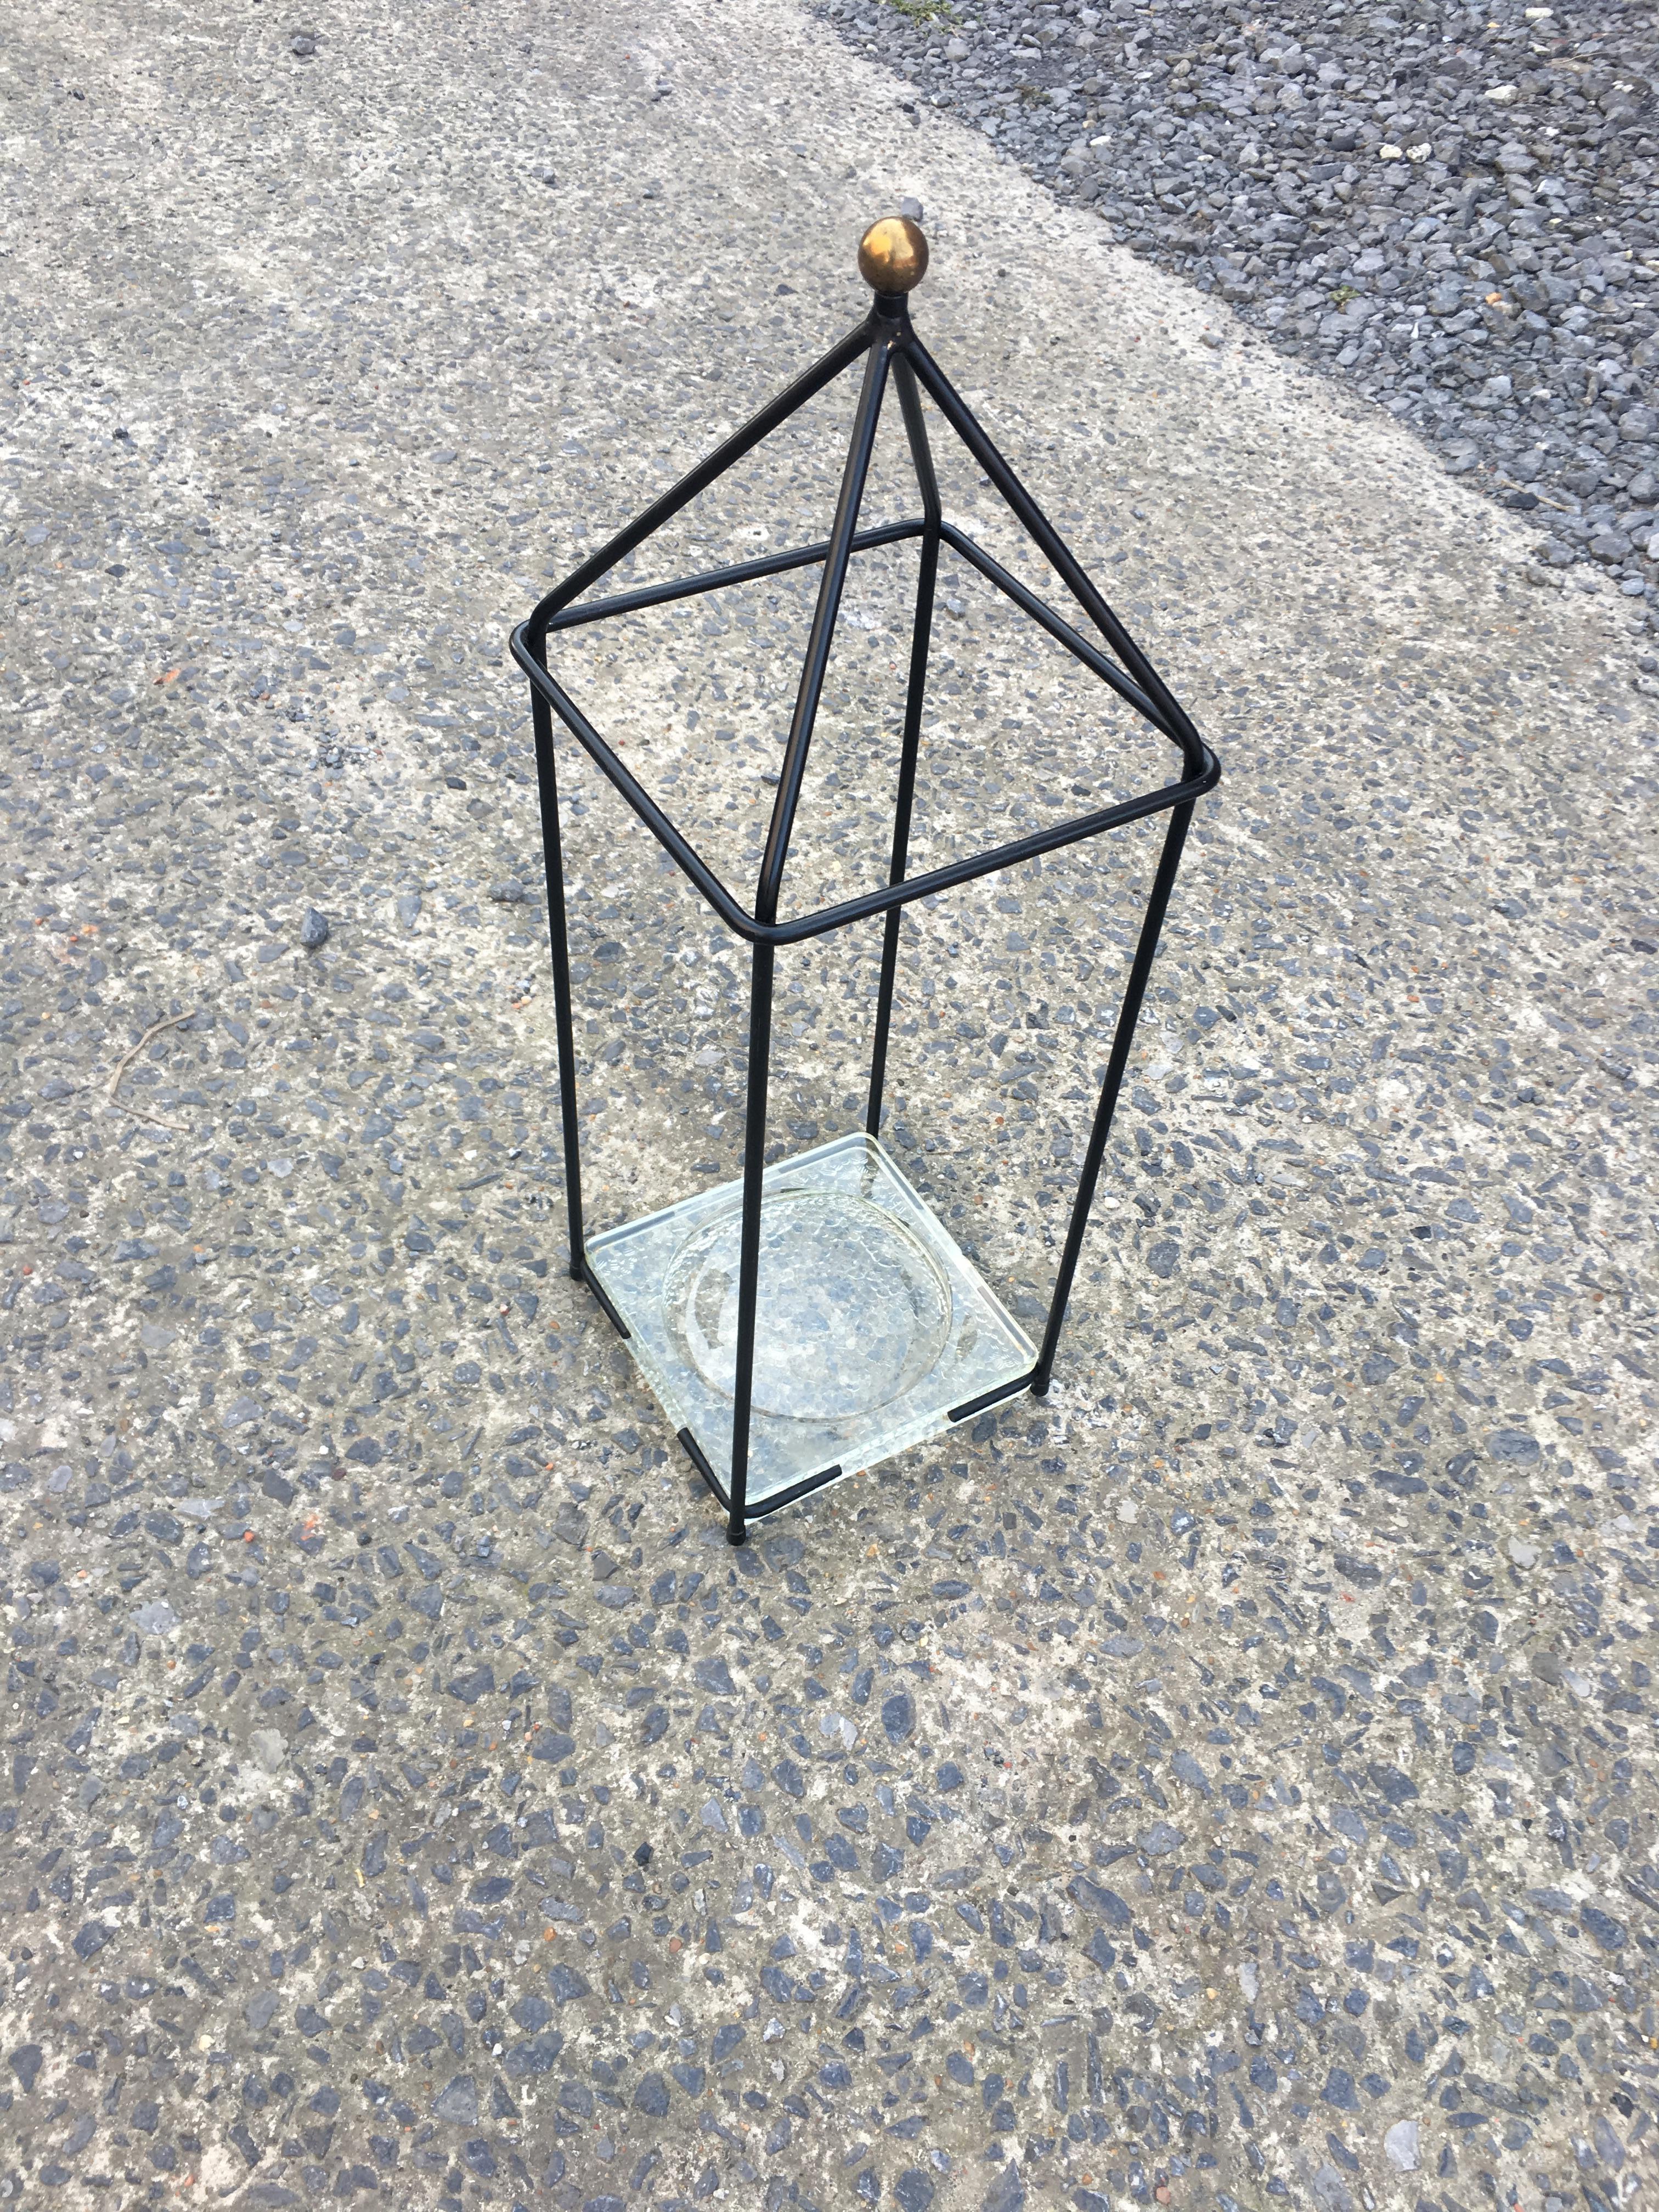 Adnet Jacques attributed. Umbrella stand, circa 1960 in lacquered metal with a golden brass ball and Saint-Gobain glass at the base.